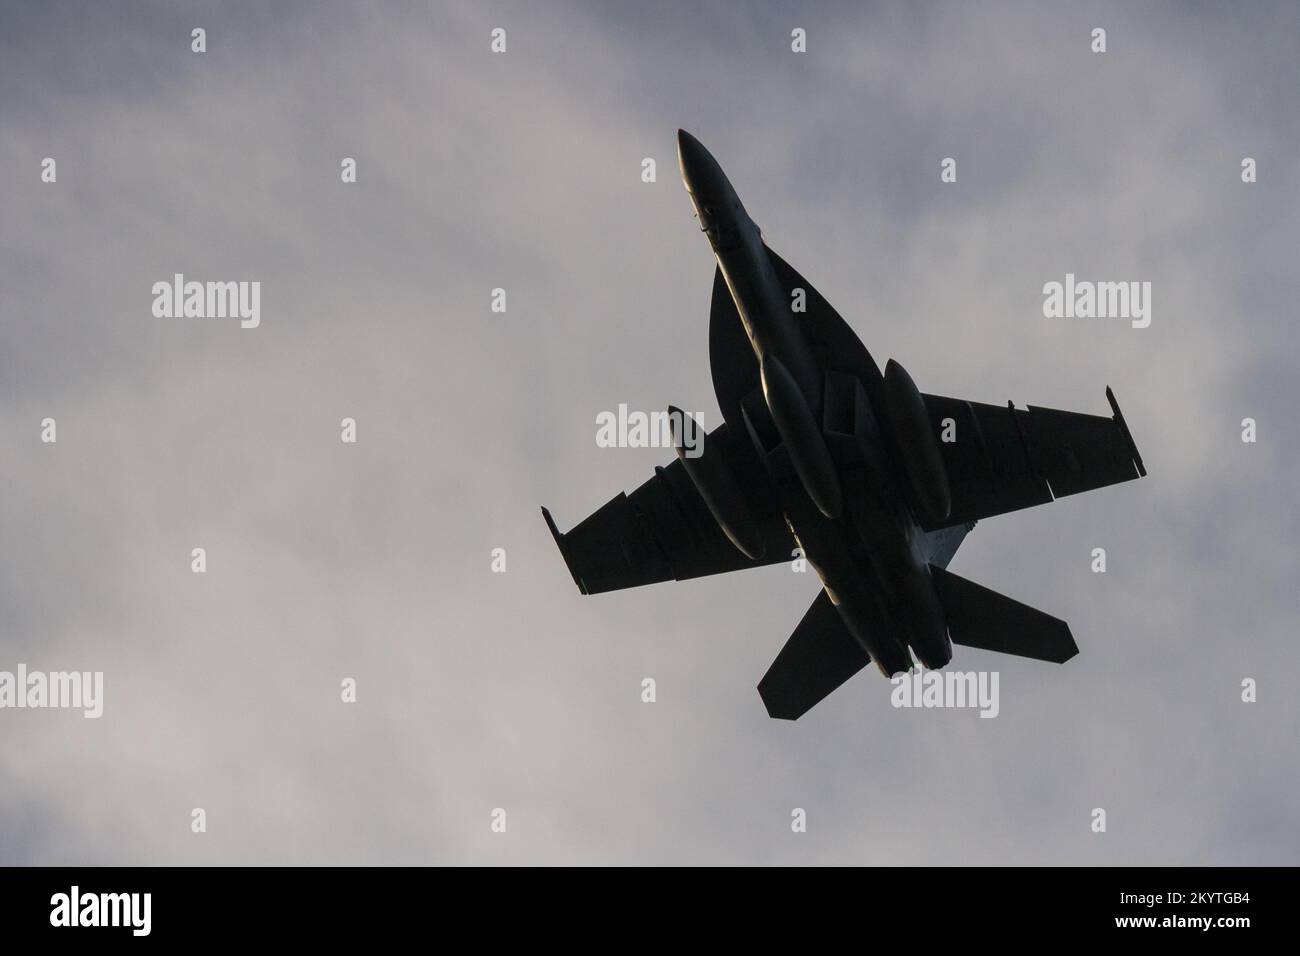 Boeing F/A-18E Super Hornet with the United States Navy flying near Naval Air Facility, Atsugi airbase, Kanagawa, Japan. Stock Photo